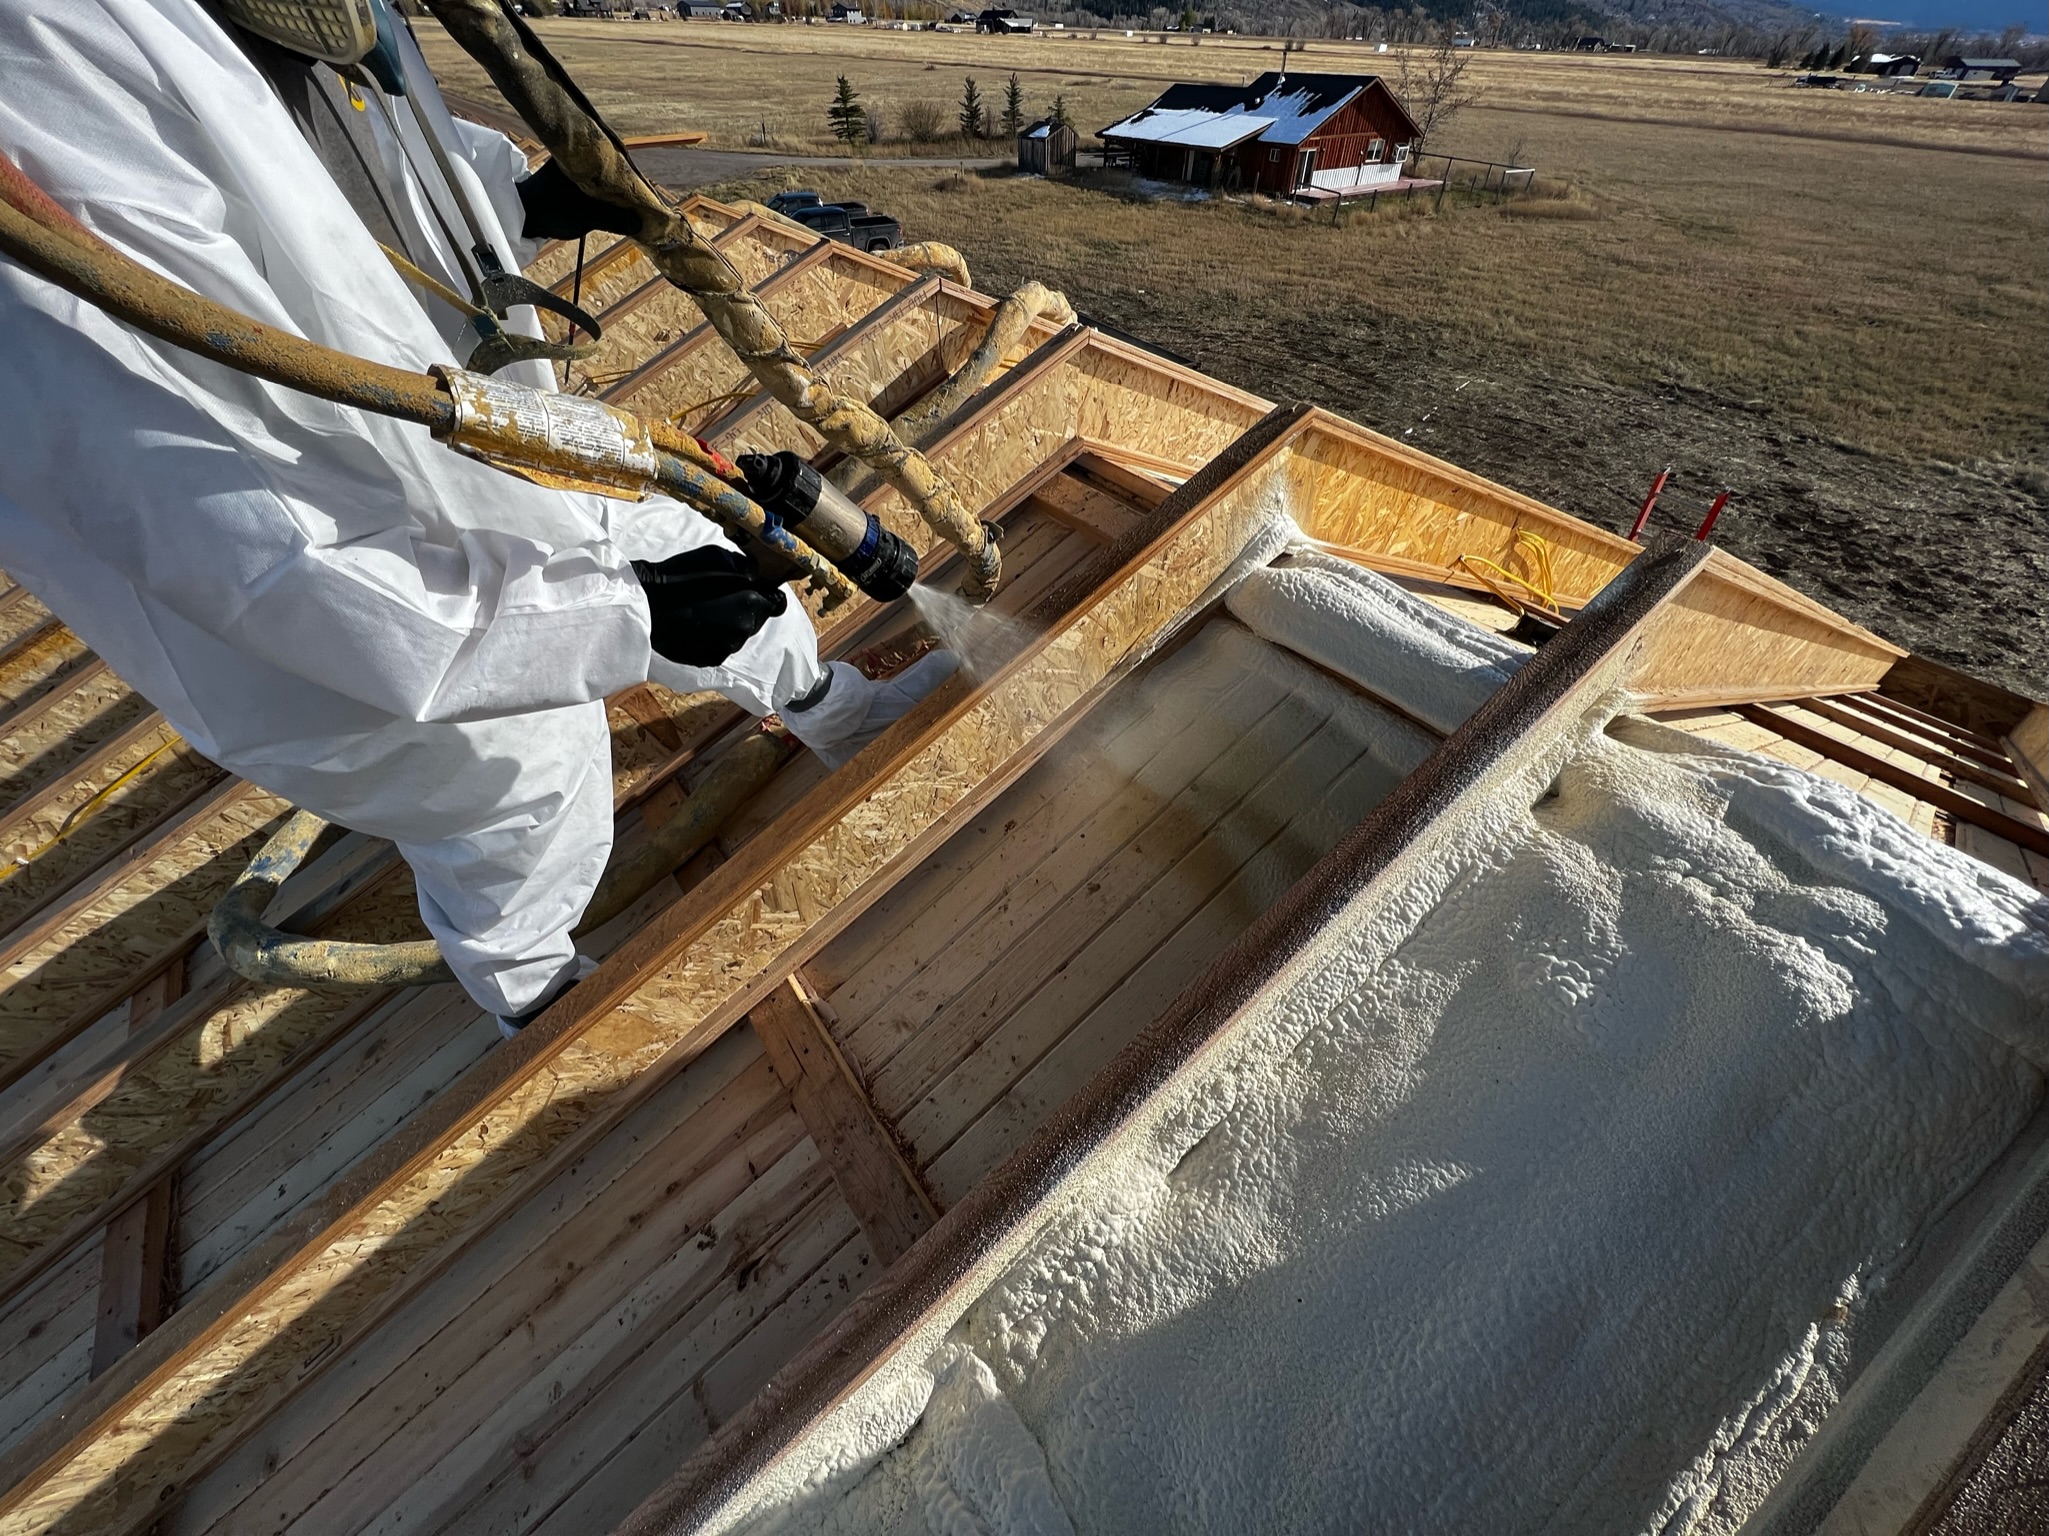 Closed cell spray foam insulation for roofs and ceilings by Cabinet Peaks Foam acts as a vapor barrier, prevents moisture, and reduces risk of mold and water damage, especially in areas with fluctuating or extreme weather, like harsh winters or humid summers.